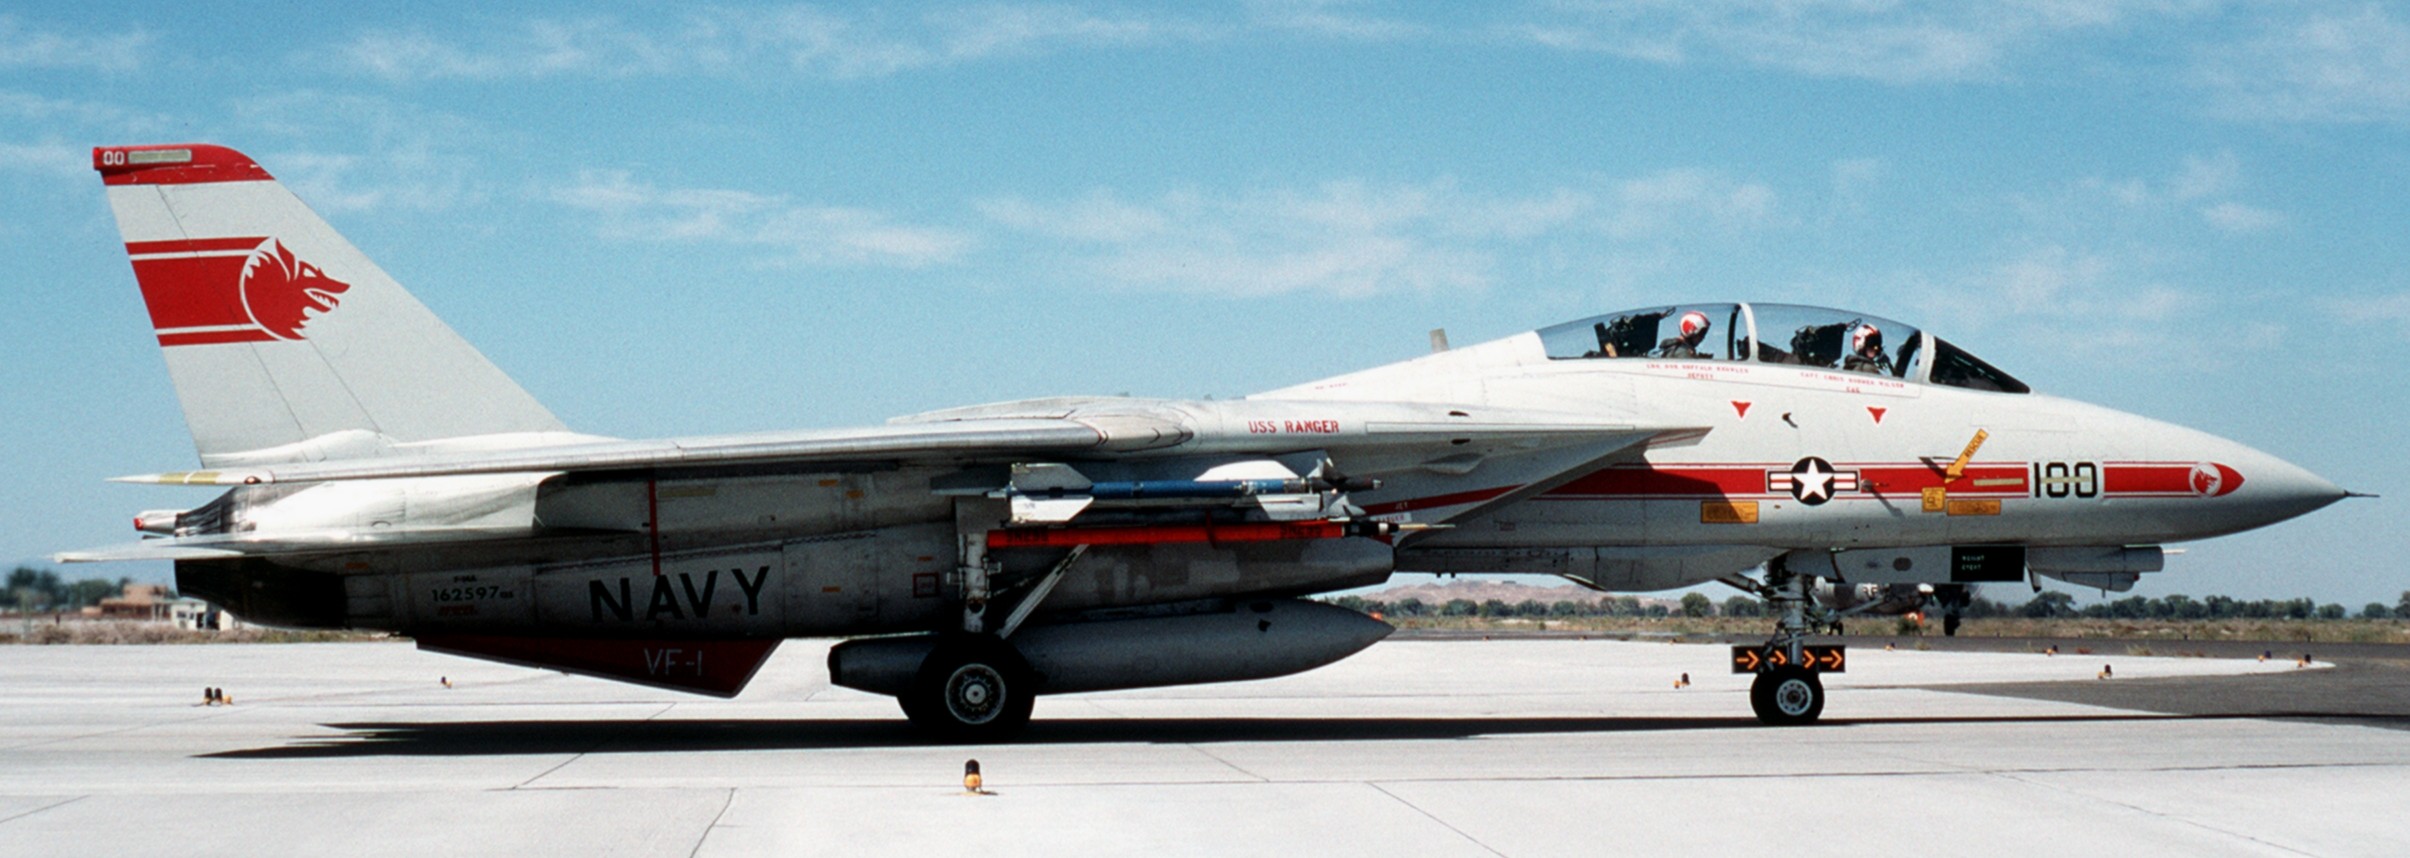 vf-1 wolfpack fighter squadron f-14a tomcat carrier air wing cvw-2 nas fallon nevada 21